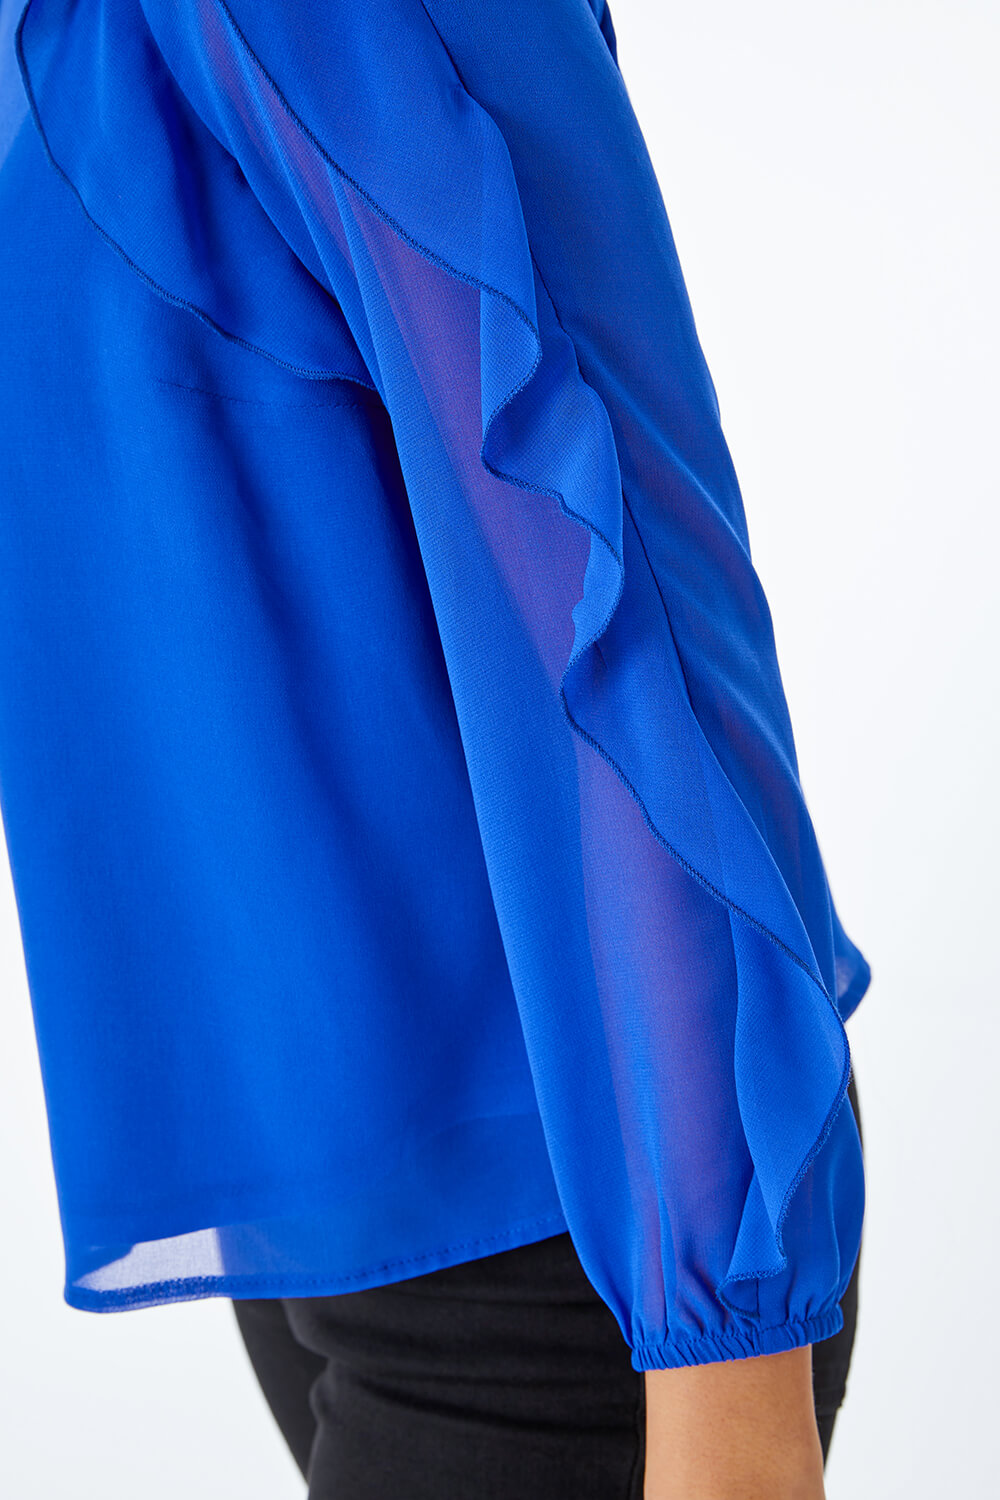 Royal Blue Petite Frill Sleeve Top, Image 5 of 5